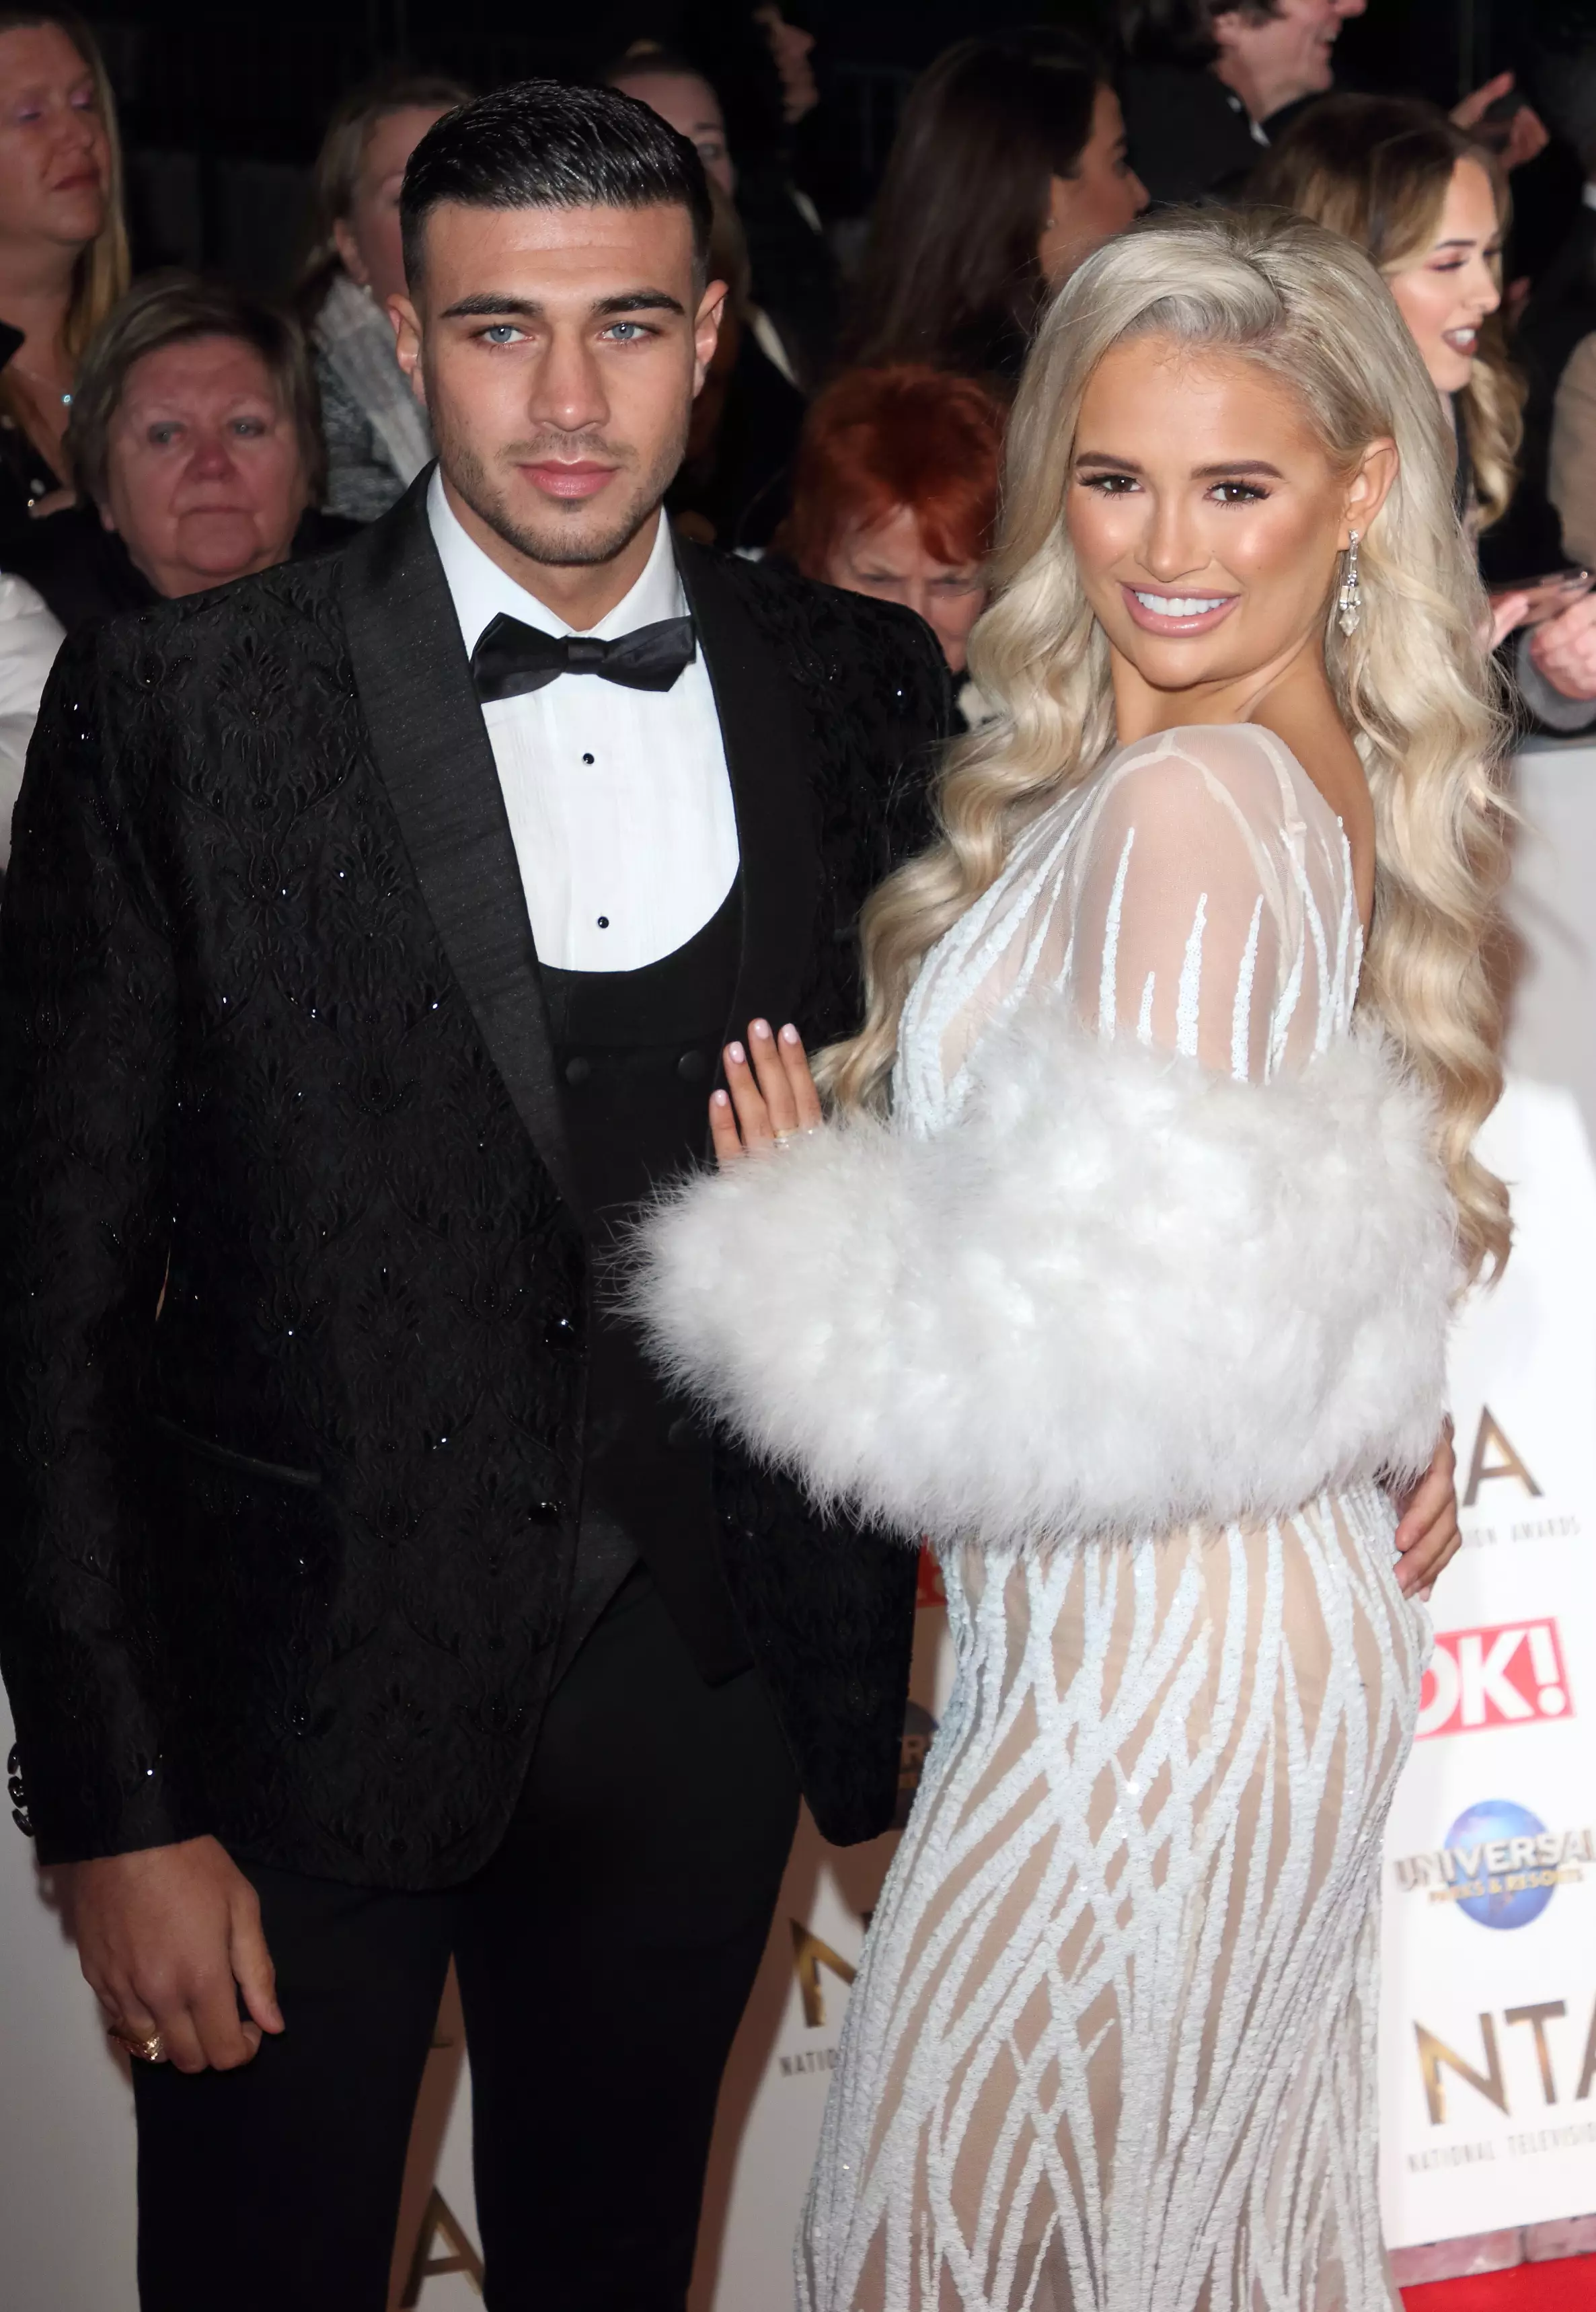 Tommy Fury with girlfriend Molly-Mae Hague.